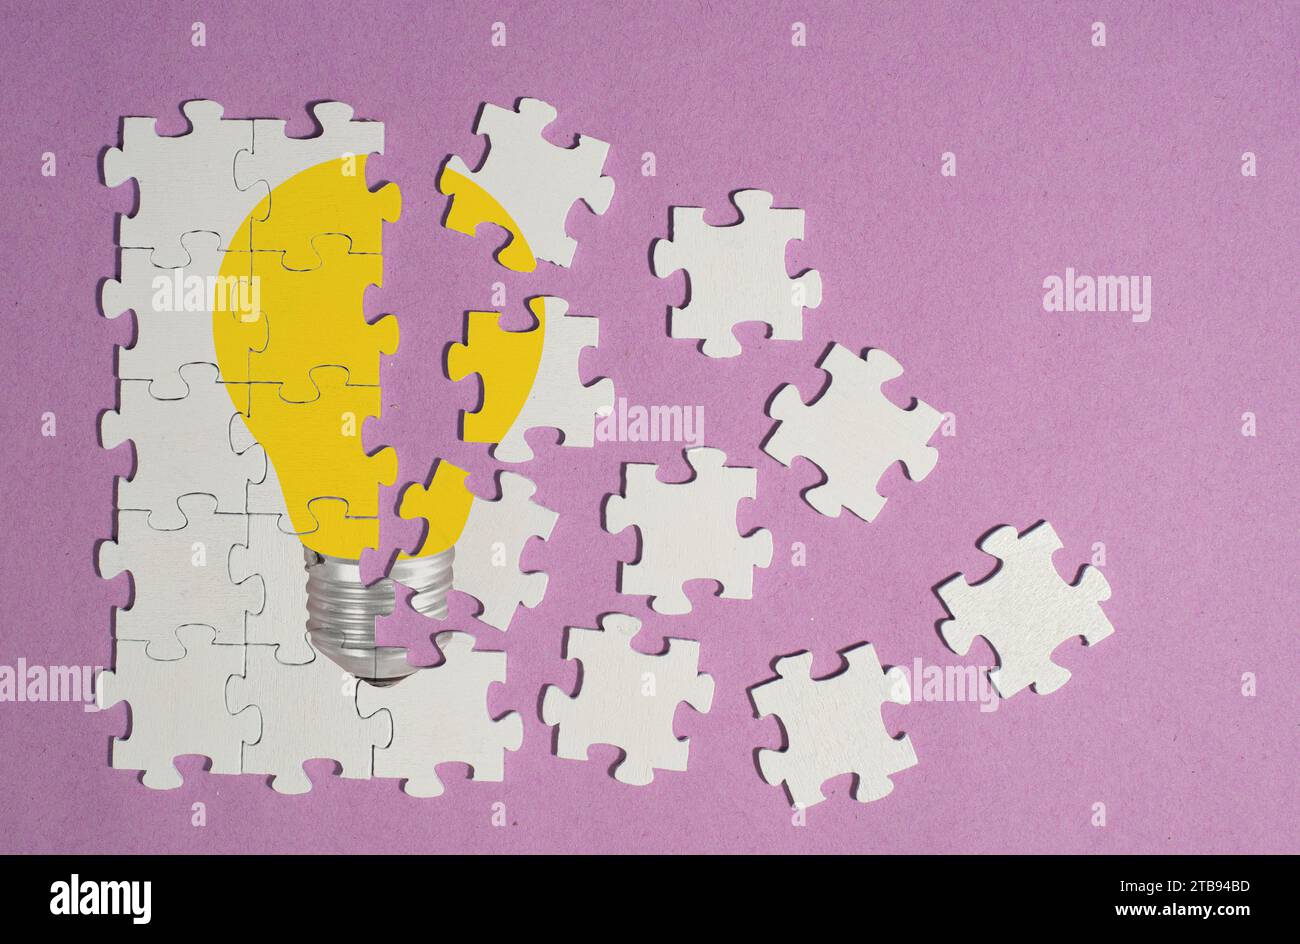 Business concept,innovation,ideas Personal development, human resources,recruitment,team building with jigsaw puzzle pieces and lightbulb Stock Photo